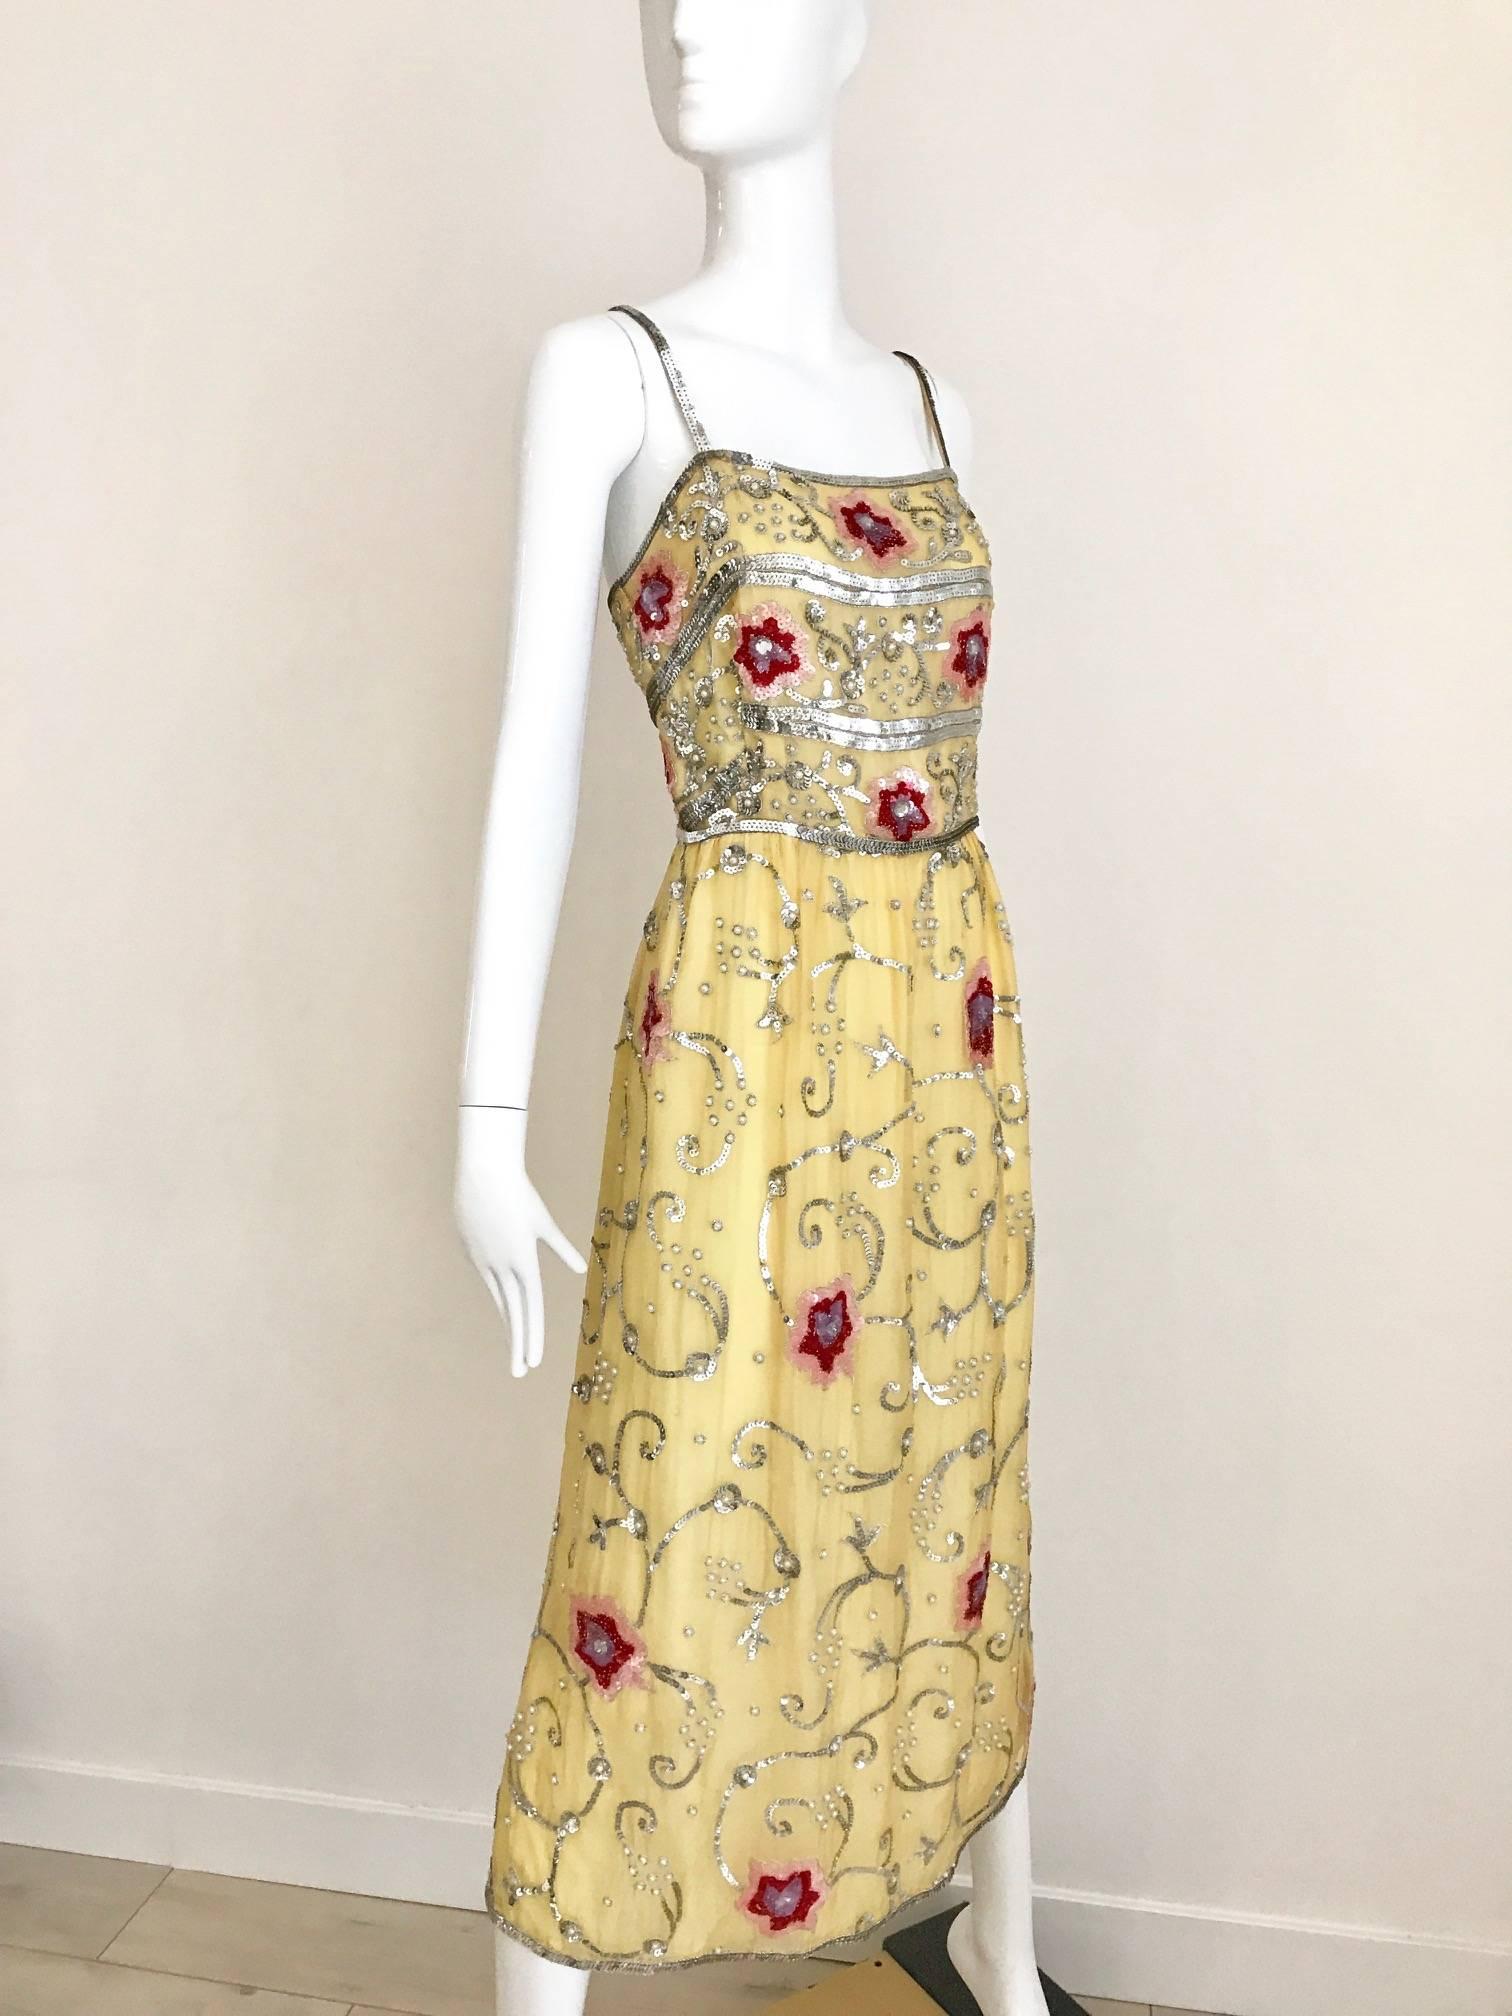 Vintage 1960s profils du monde Yellow silk chiffon gown adorned with red , silver sequins and pearls. Timeless and chic old hollywood glamour style. Fit modern size 6 /8 
Measurement: 
Bust: 38 inch / Waist: 28 inch / Hip: 40 inch  
Dress length: 50